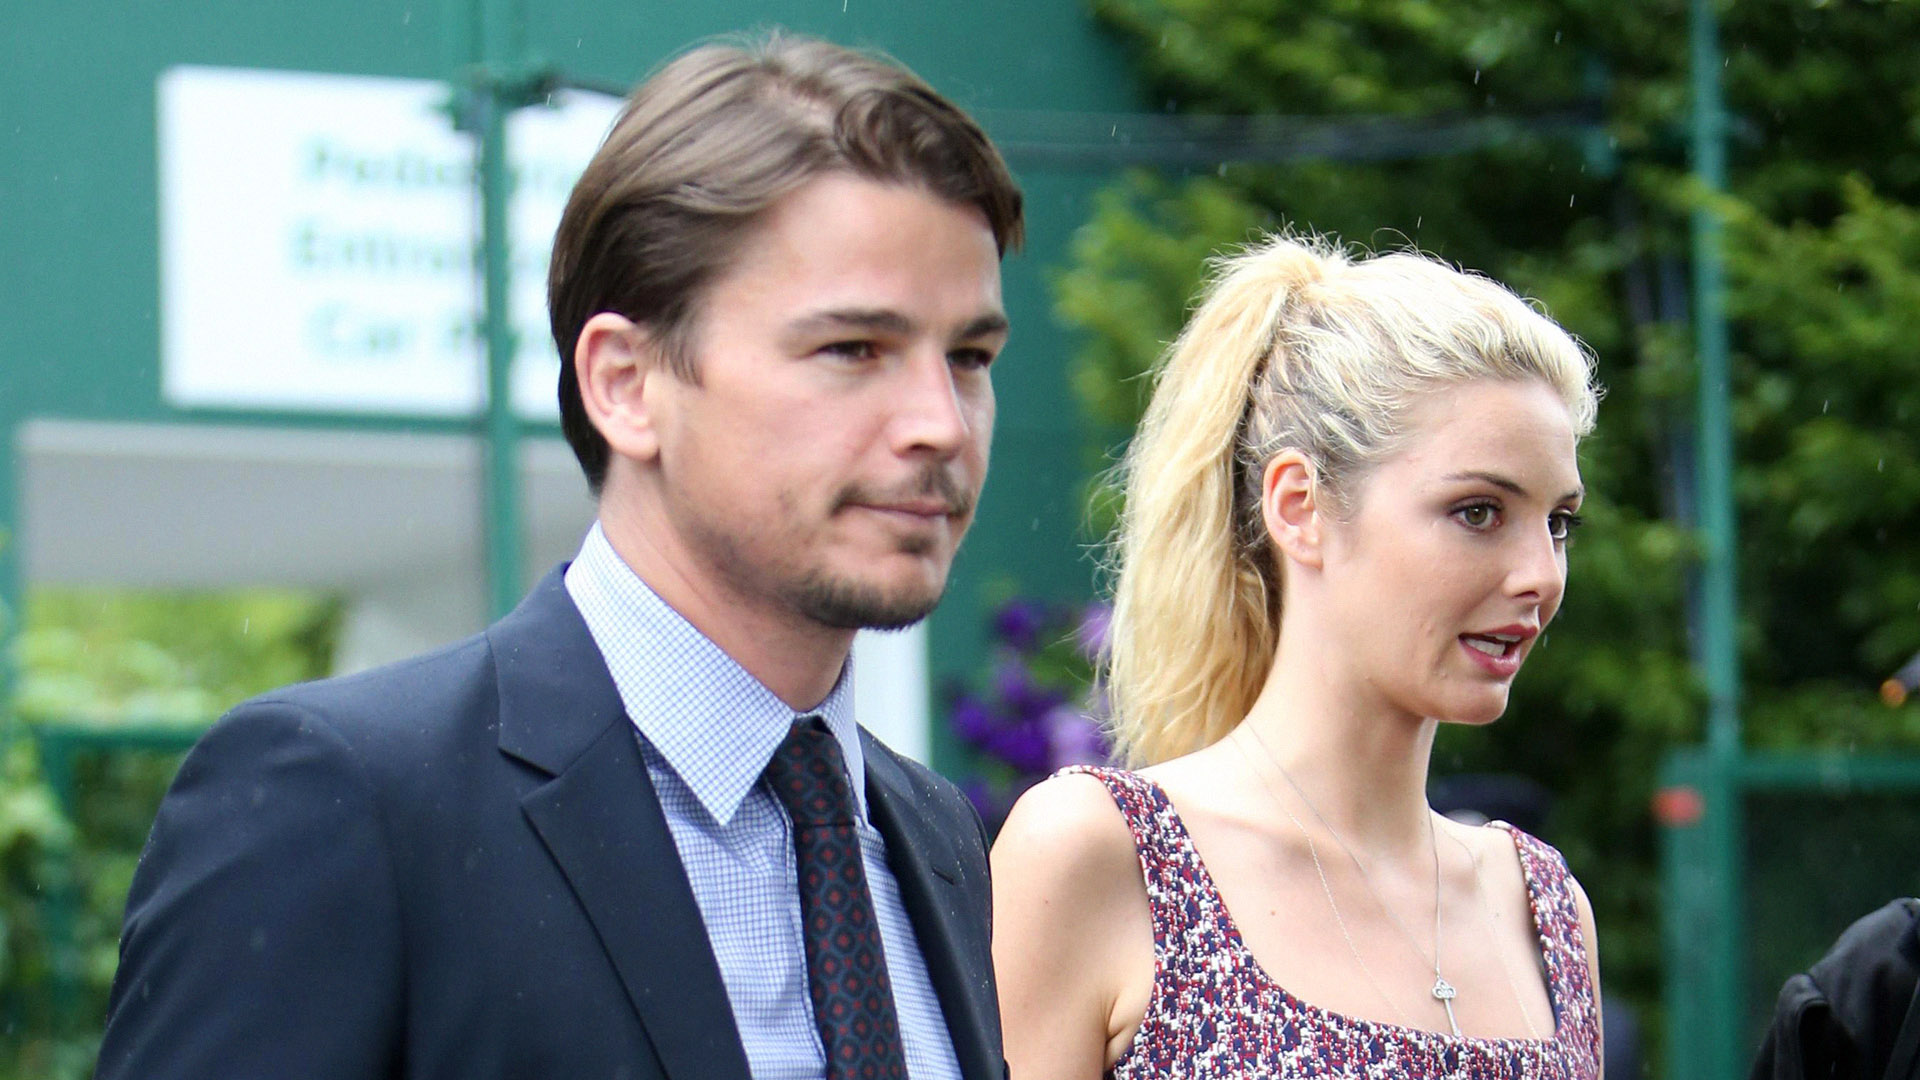 Josh Hartnett's Wife is a Famous Actress: Here's Where You've Seen Her Before